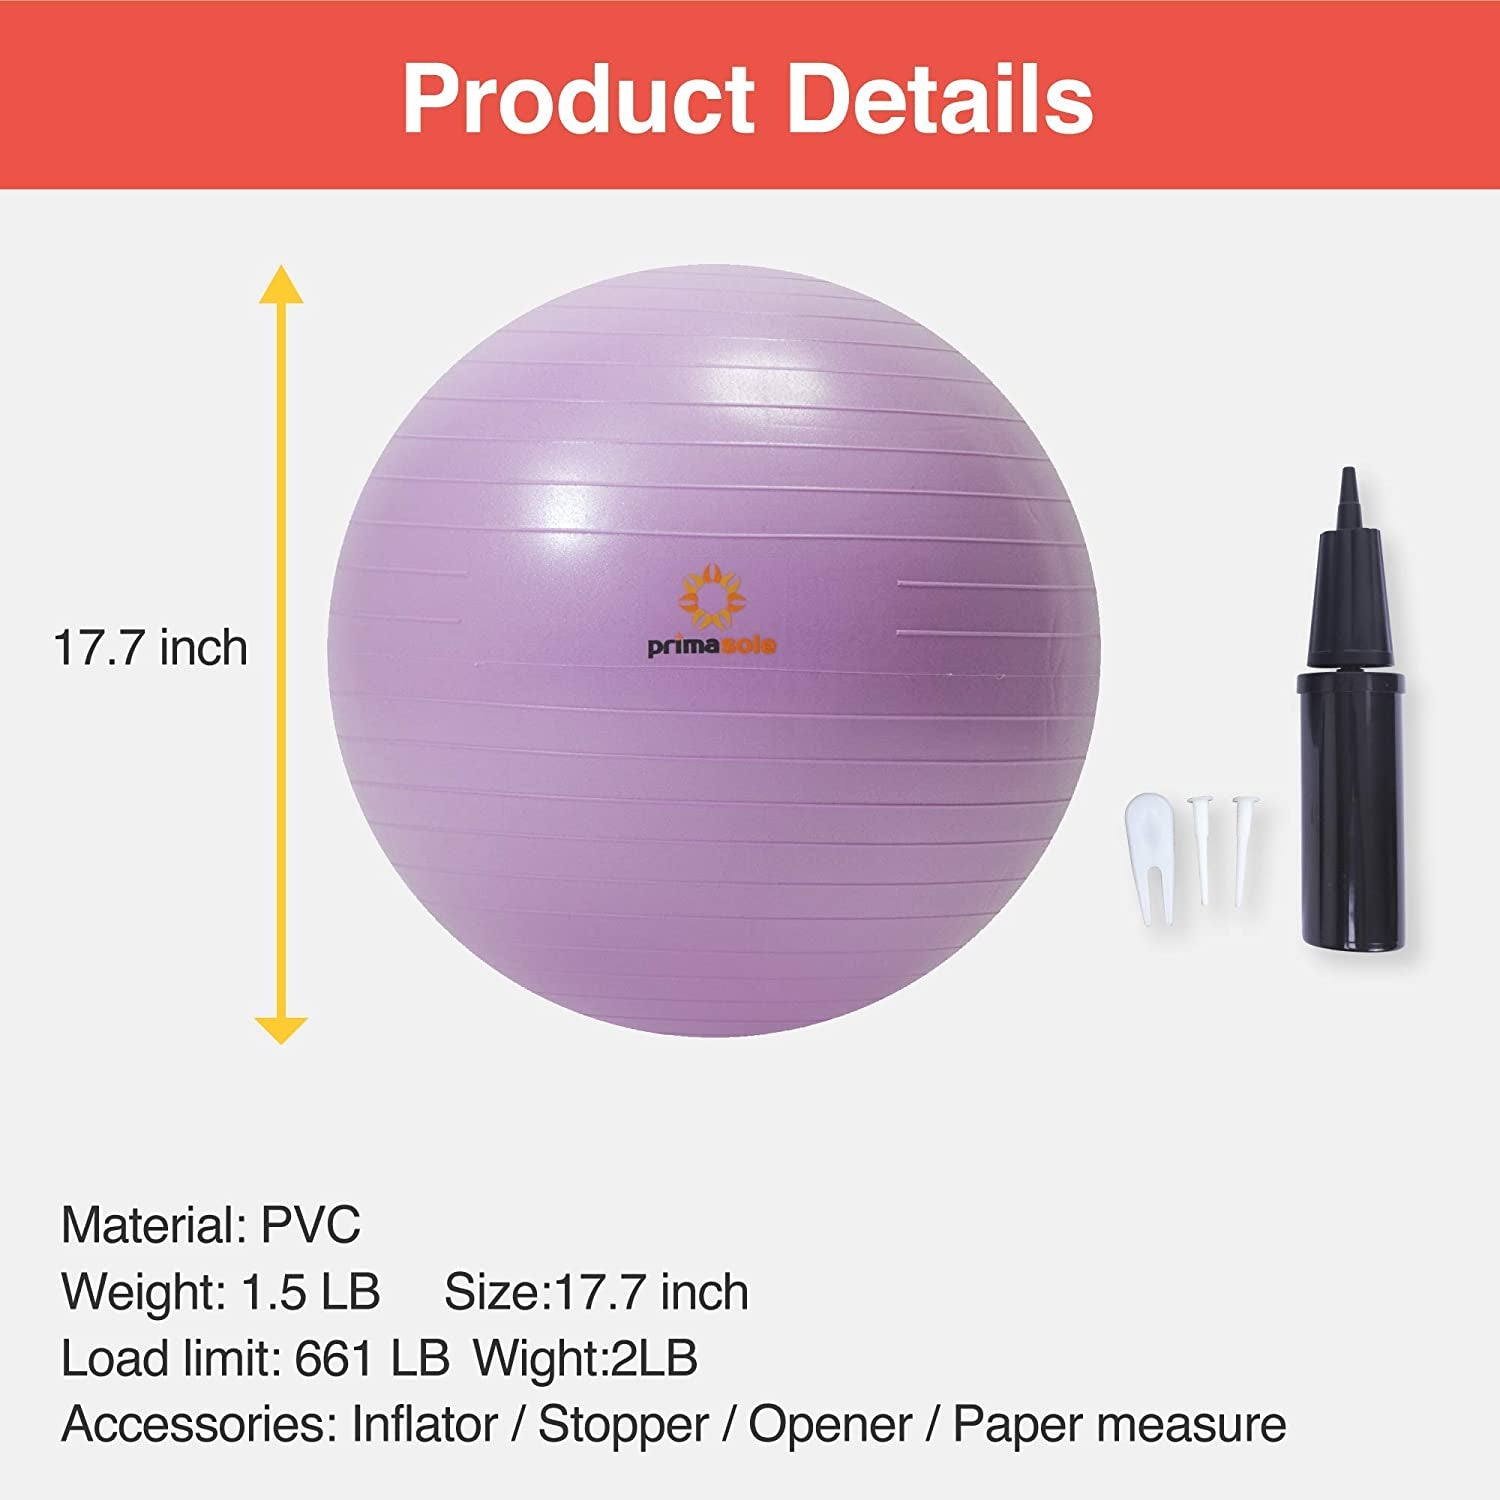 Exercise Ball Anti-Burst Pregnancy Yoga Ball for Balance Stability Fitness Workout Core Strength at Home & Office